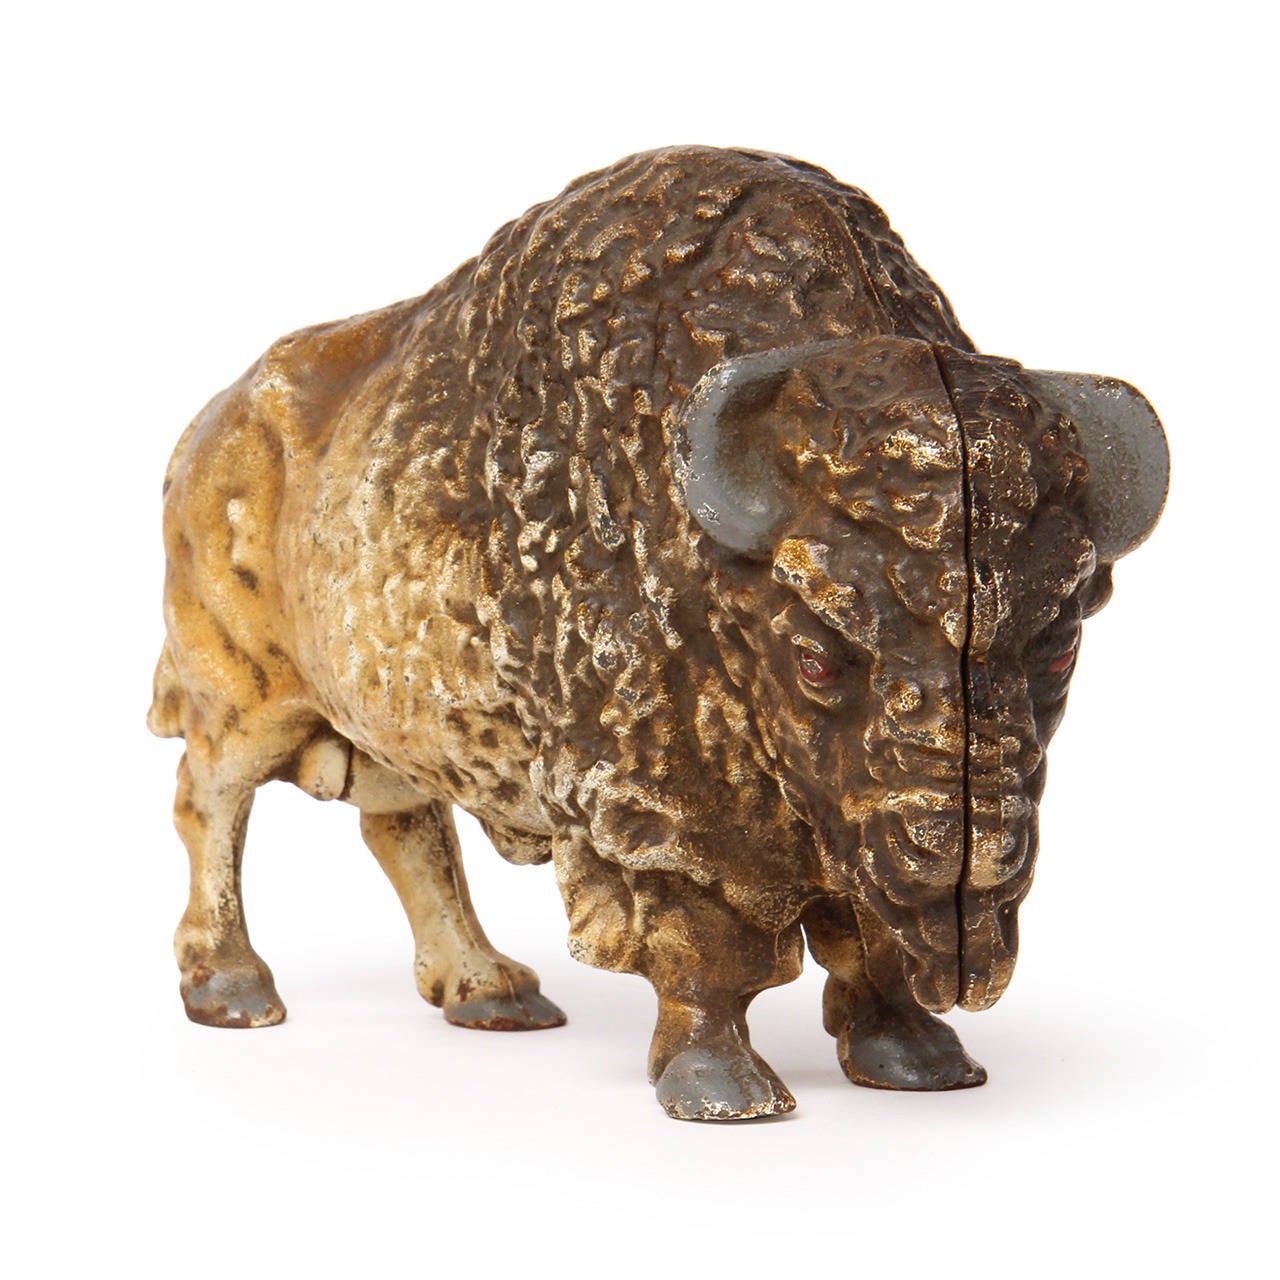 A beautifully modeled cast iron bison still bank that retains much of its original polychrome surface.